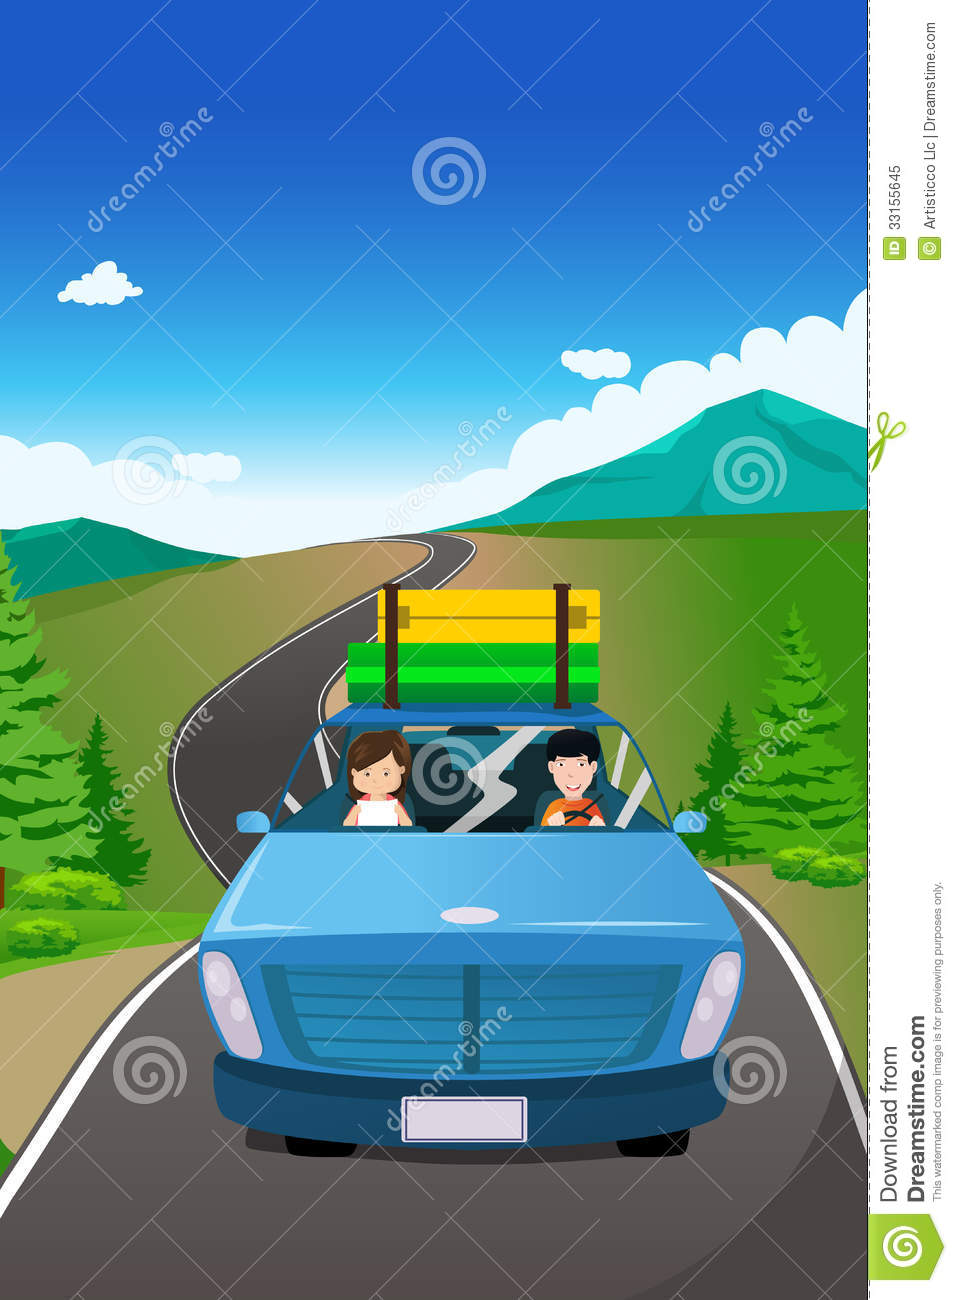 Couple Riding A Car Going On A Road Trip Royalty Free Stock Photo